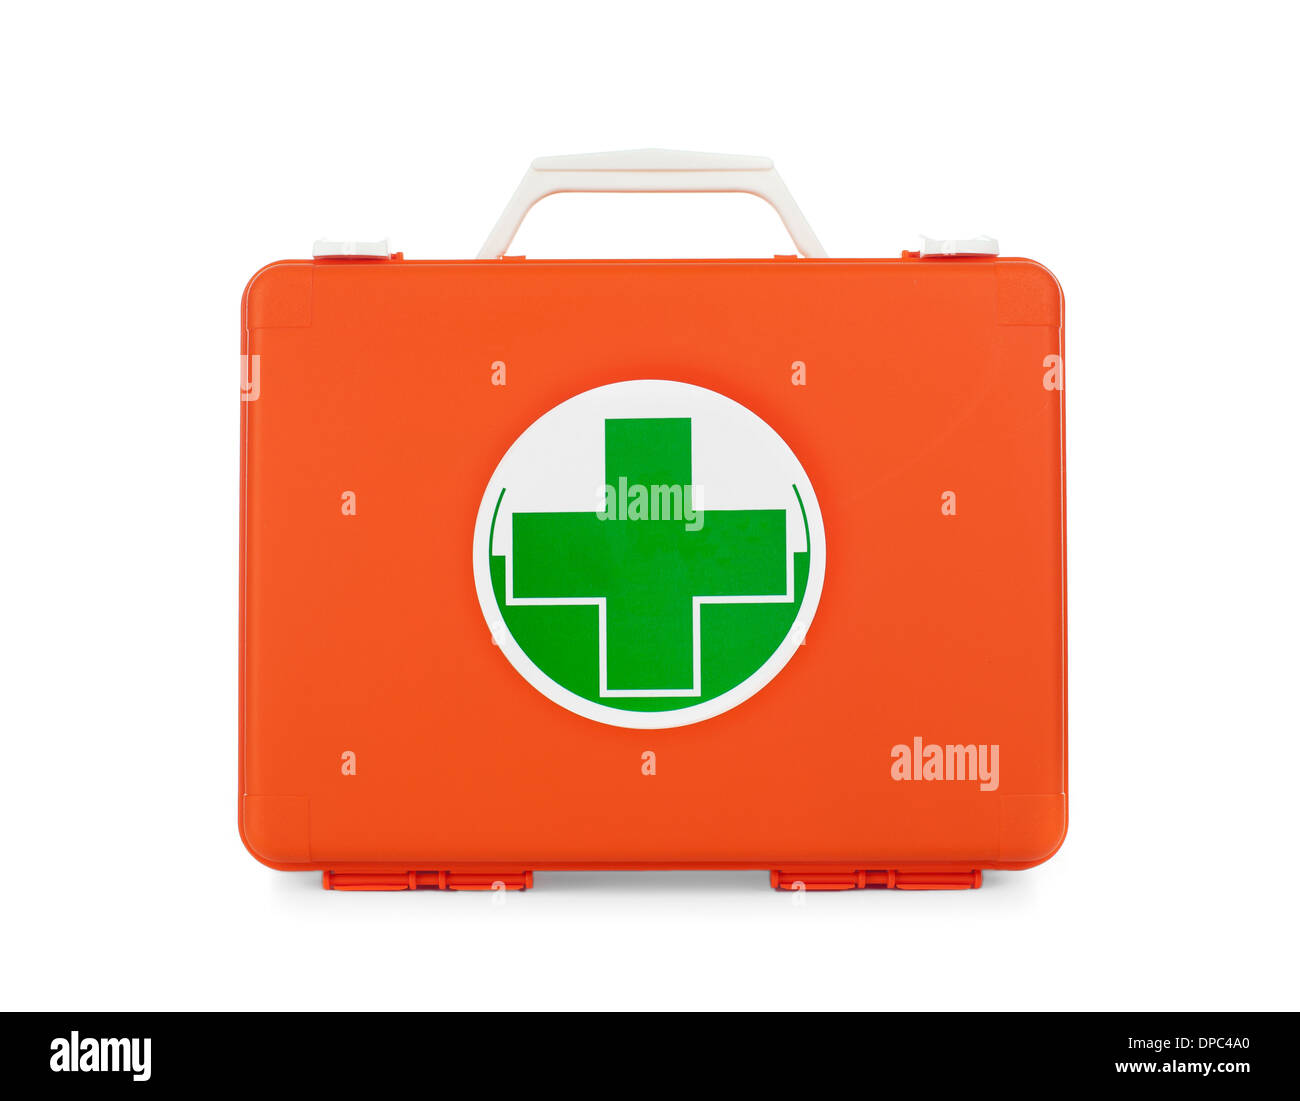 First Aid Kit isolated on white background Stock Photo